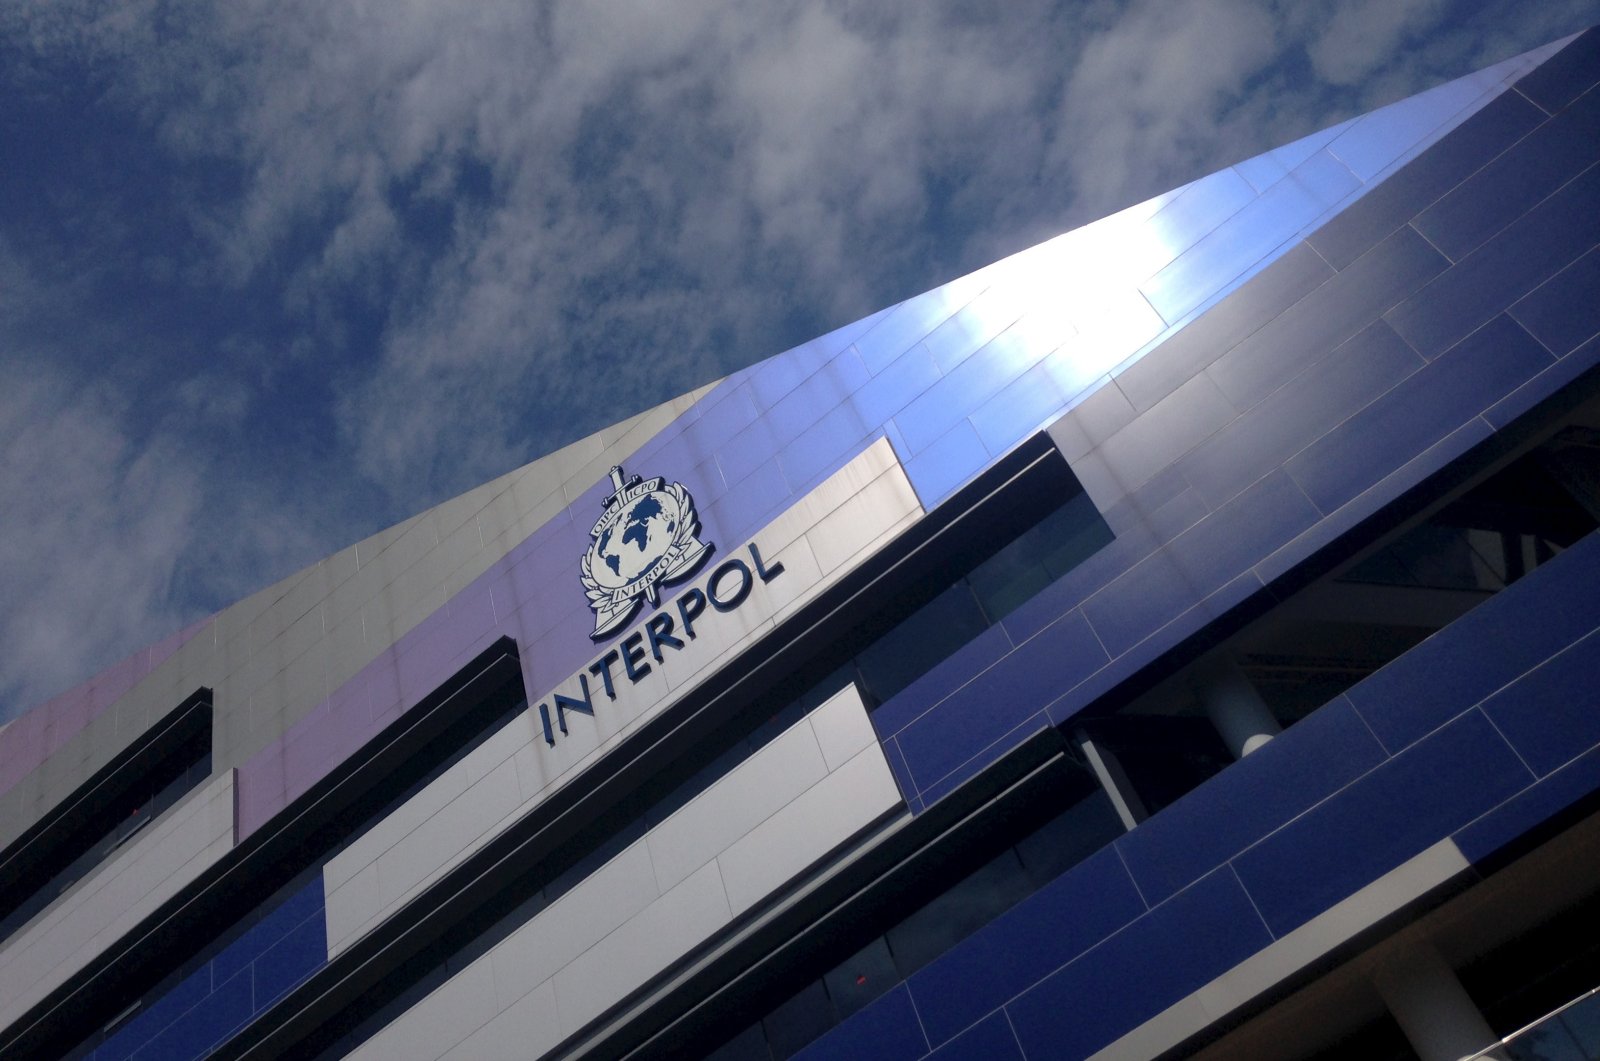 Interpol's headquarters are seen in Singapore November 18, 2015. (Reuters Photo)